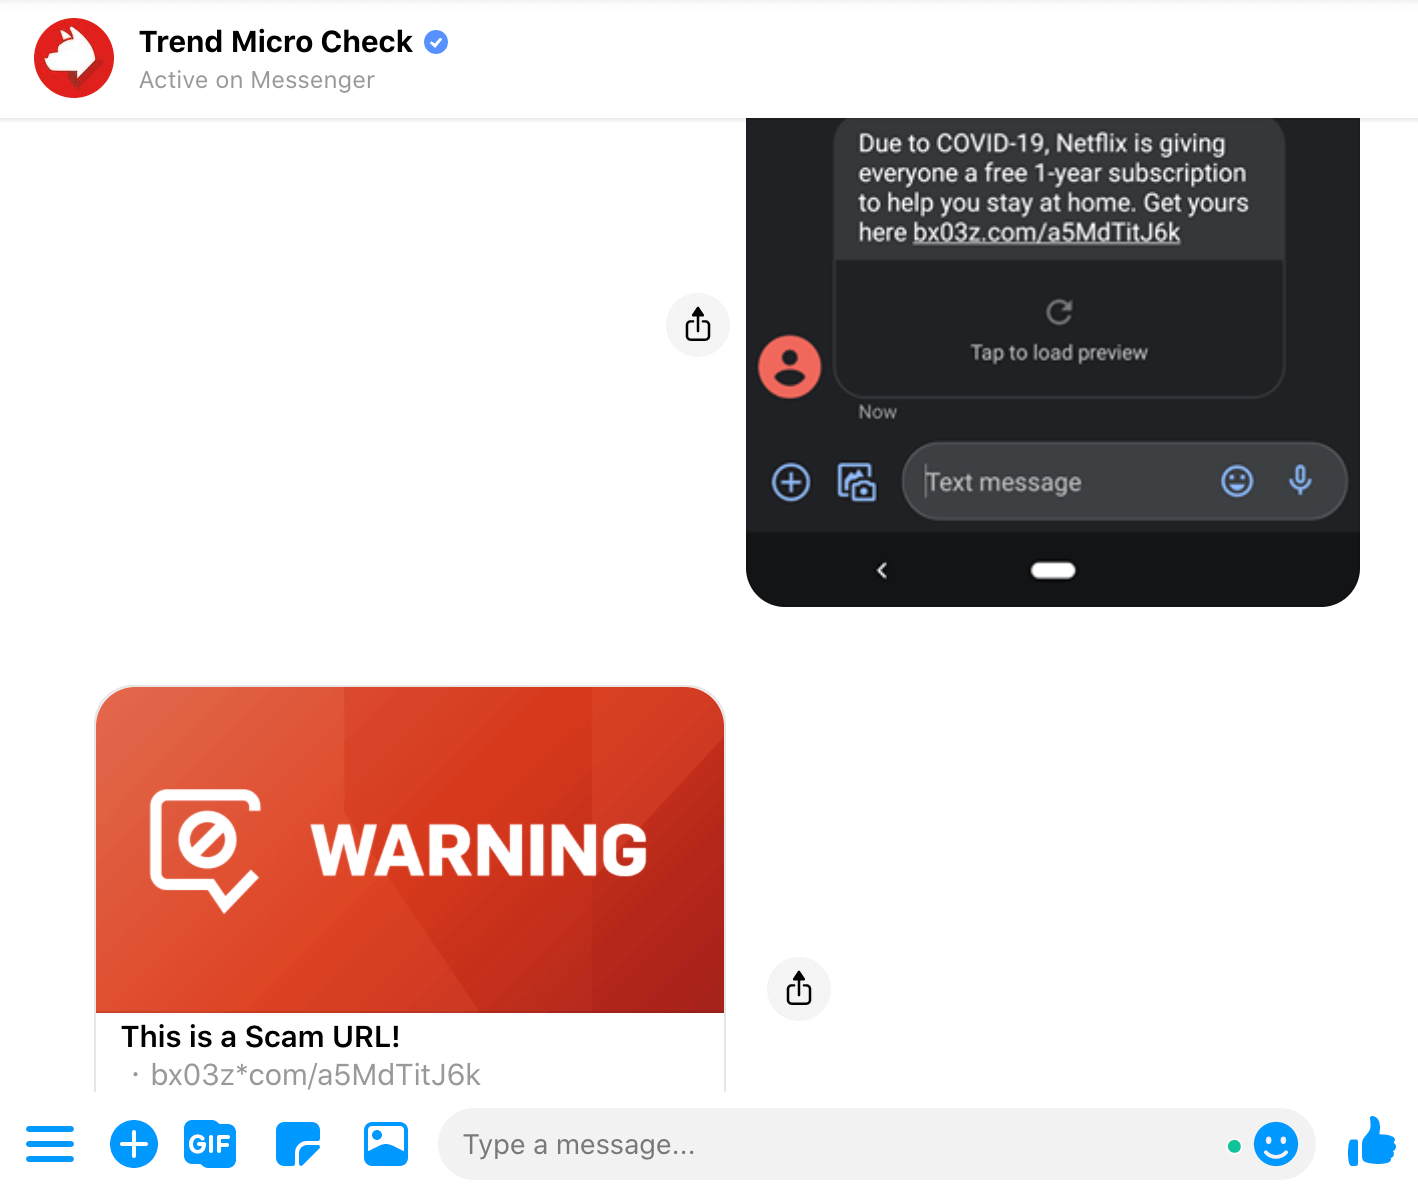 Send the screenshot to Trend Micro Check chatbot for immediate scam detection.